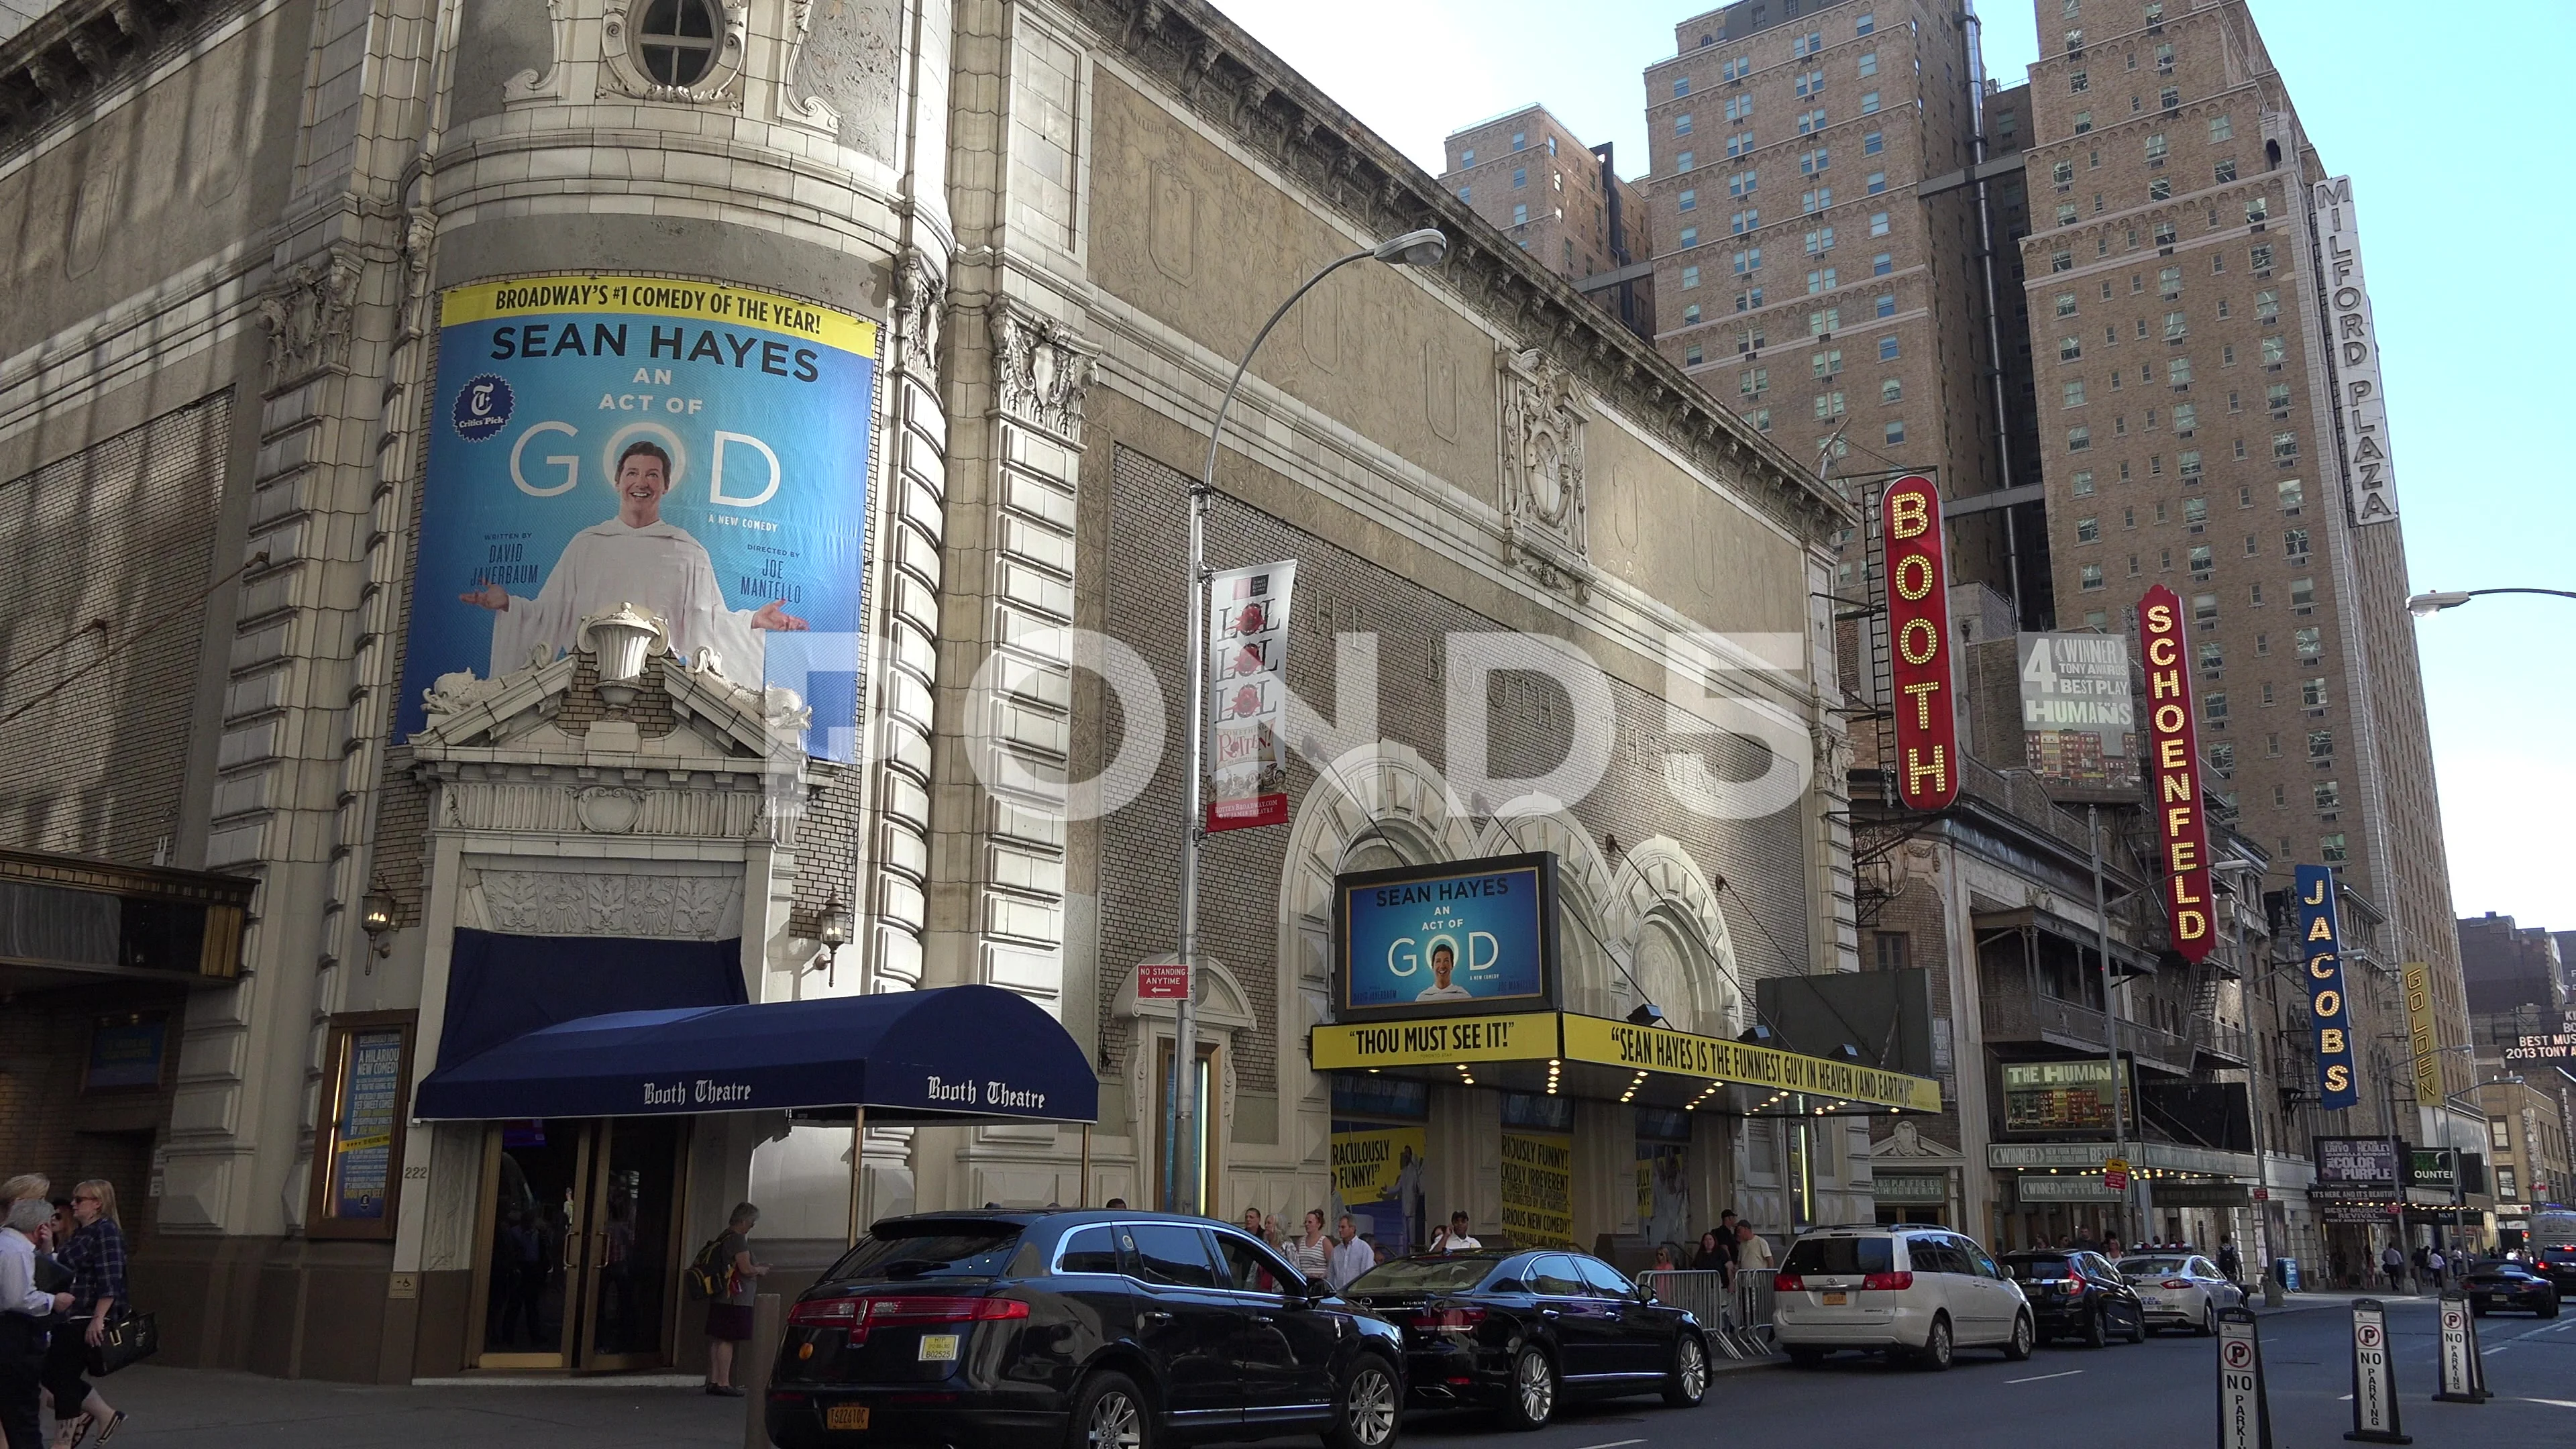 NYC - Theatre District: Booth Theatre and West 45th Street…